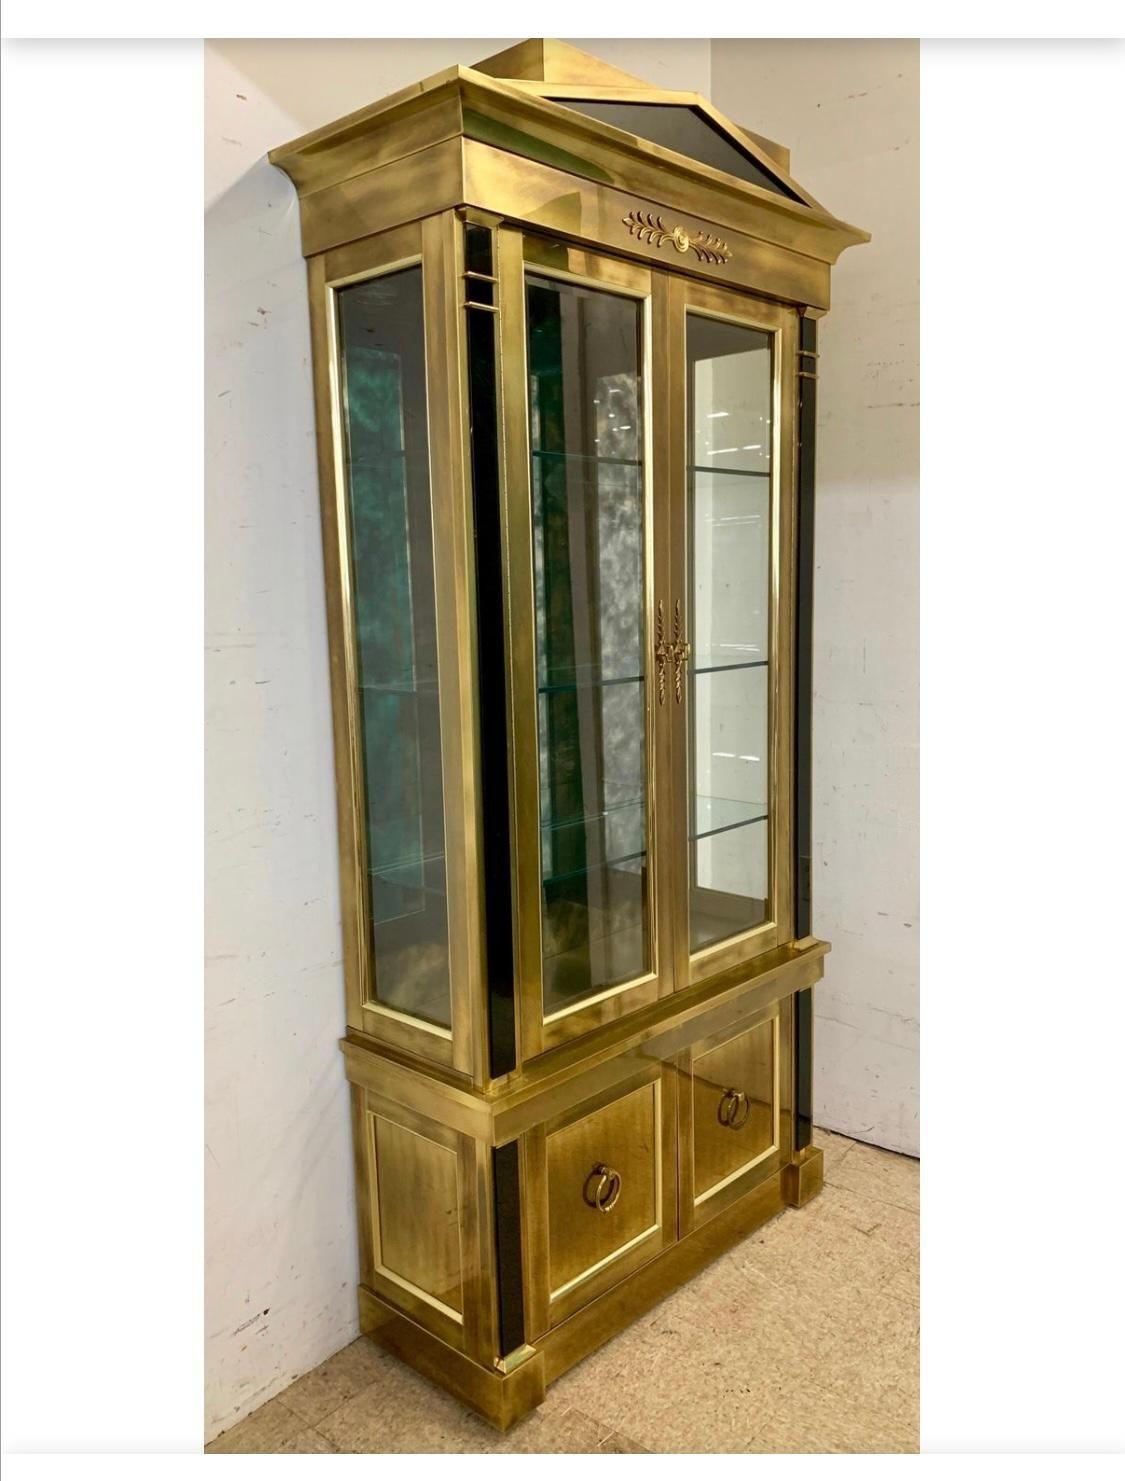 Pair of elegant brass vitrines/displays by Mastercraft with two doors with beveled glass and two small ones below. Beautiful antiqued mirror inside each vitrine and two lights on top. Made in USA, c. 1970's.
